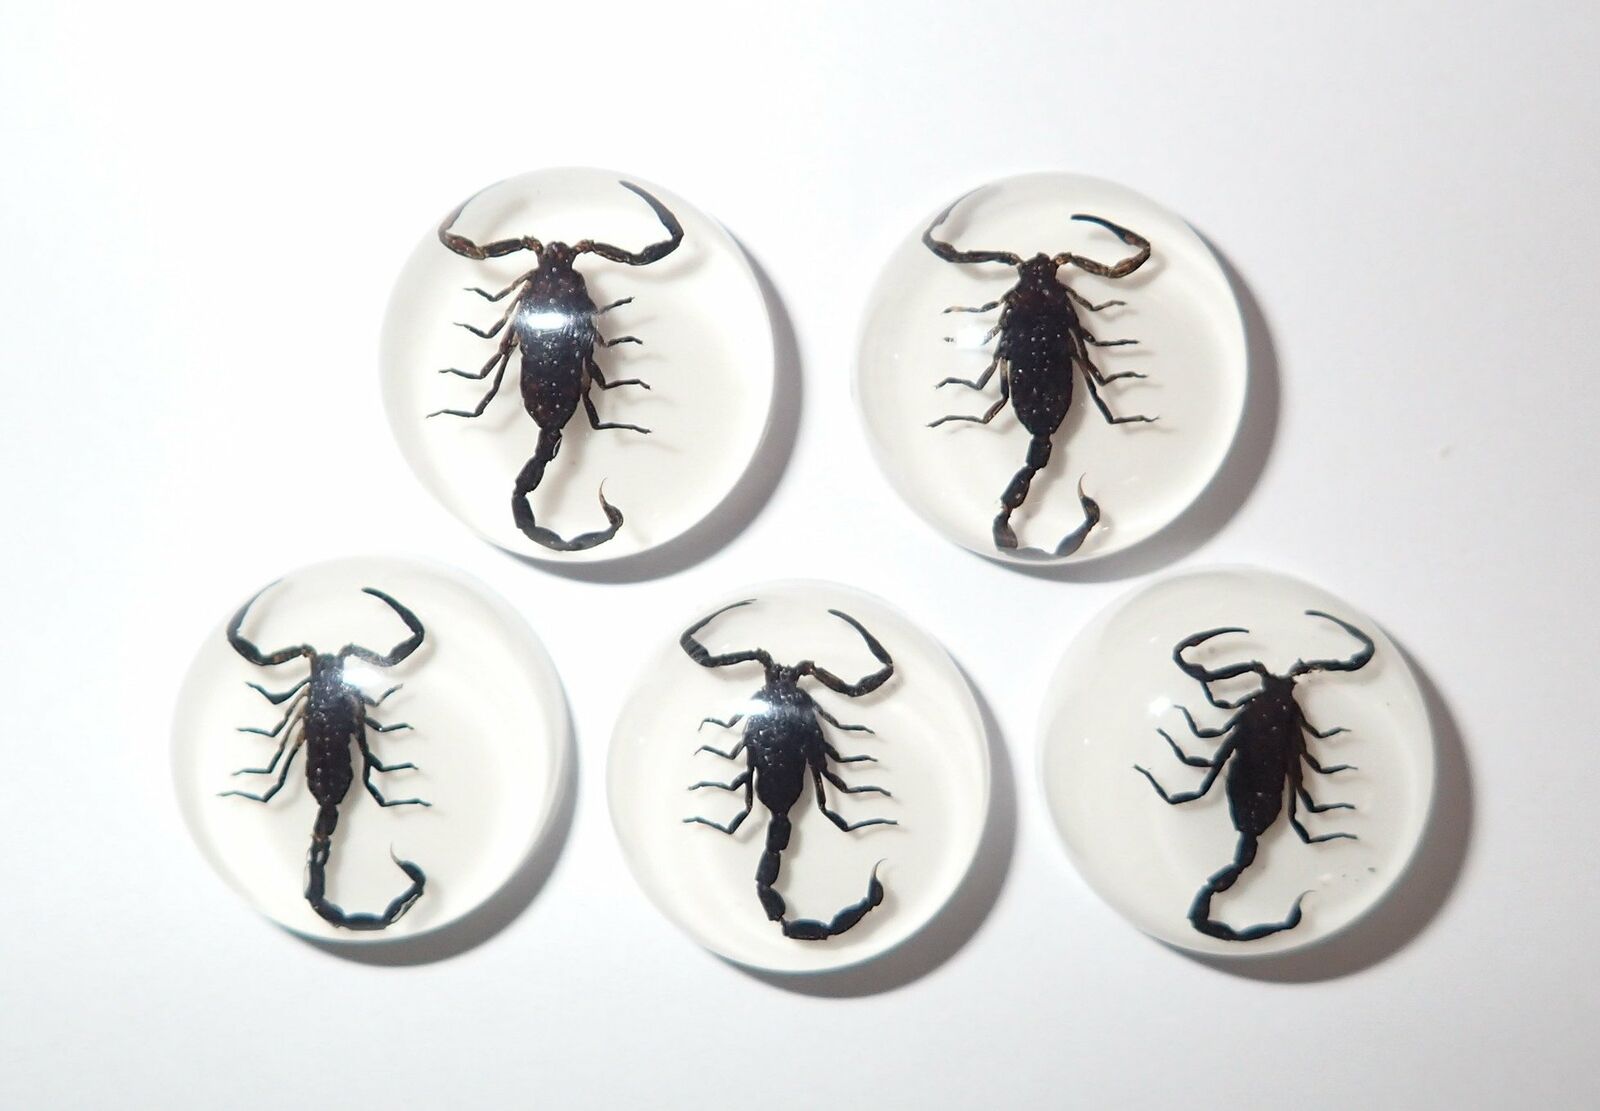 Insect Cabochon Black Scorpion Specimen Round 19 Mm On White 100 Pieces Lot